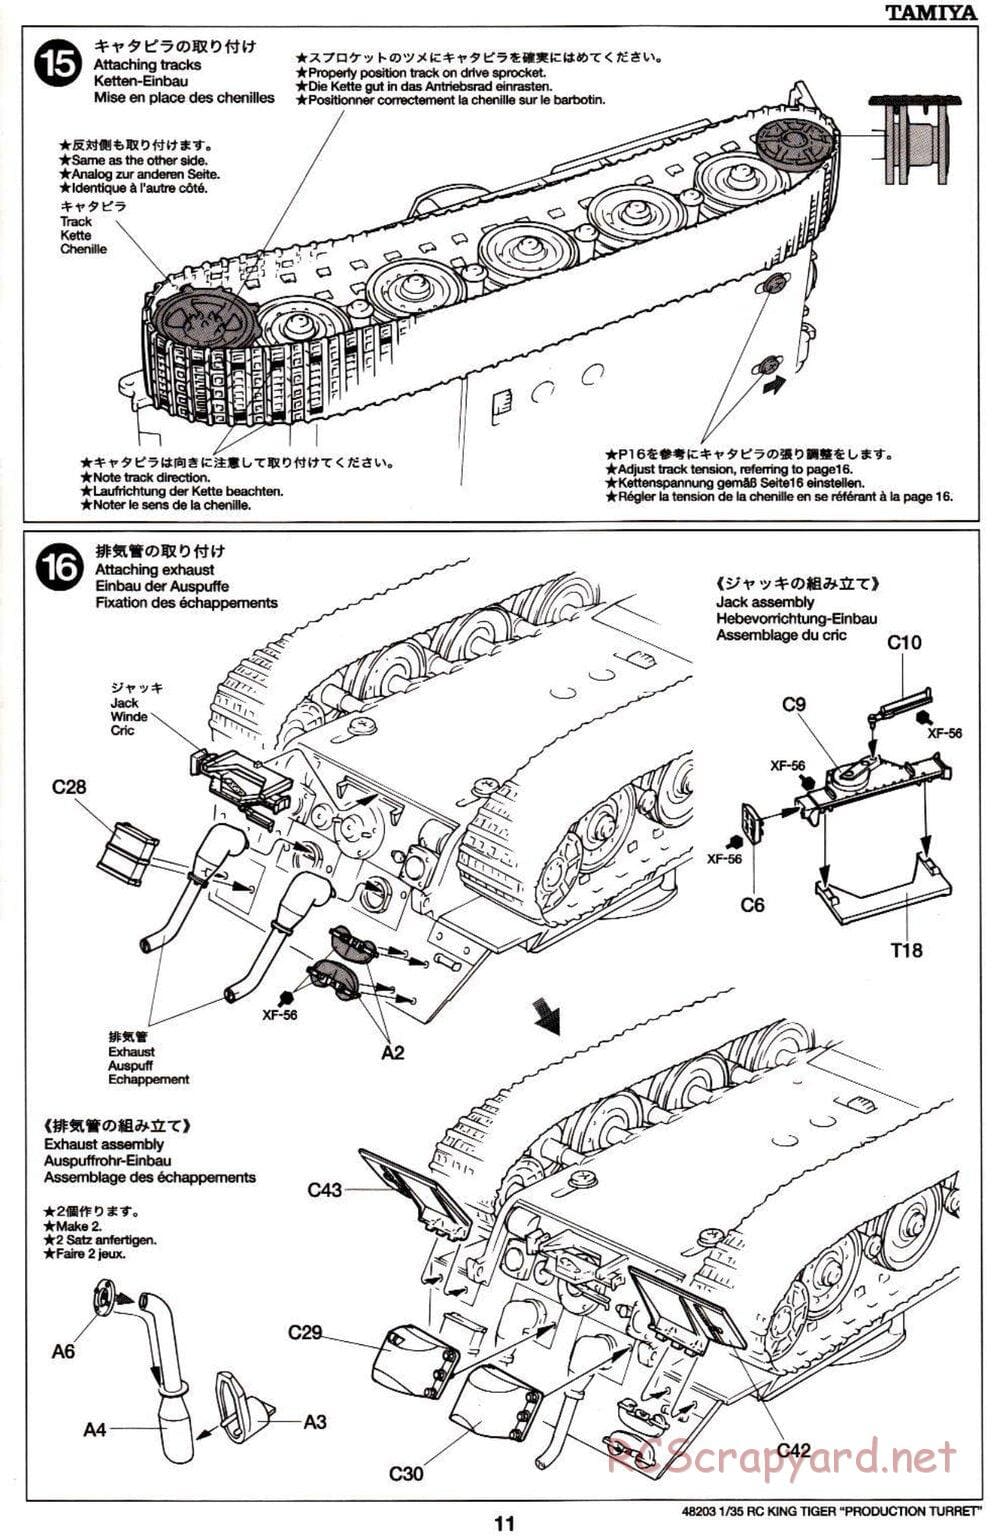 Tamiya - German King Tiger (Production Turret) - 1/35 Scale Chassis - Manual - Page 11